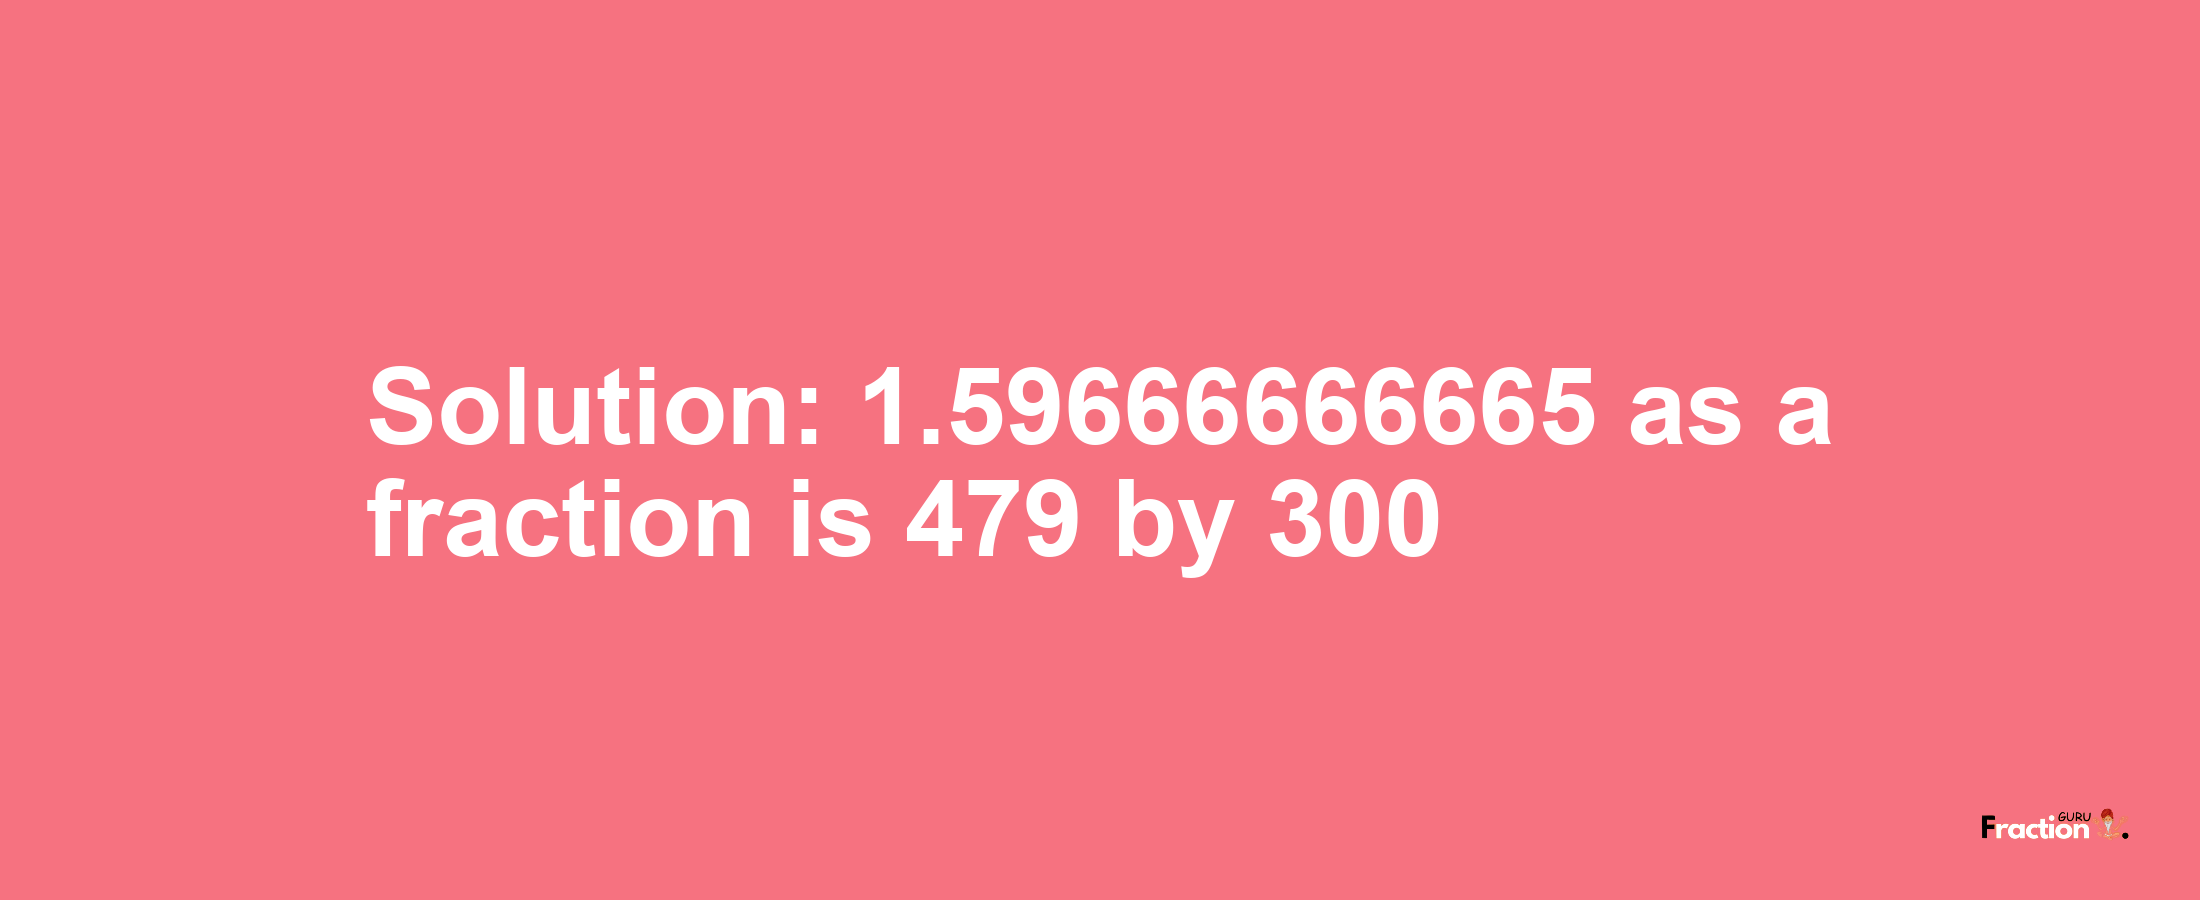 Solution:1.59666666665 as a fraction is 479/300